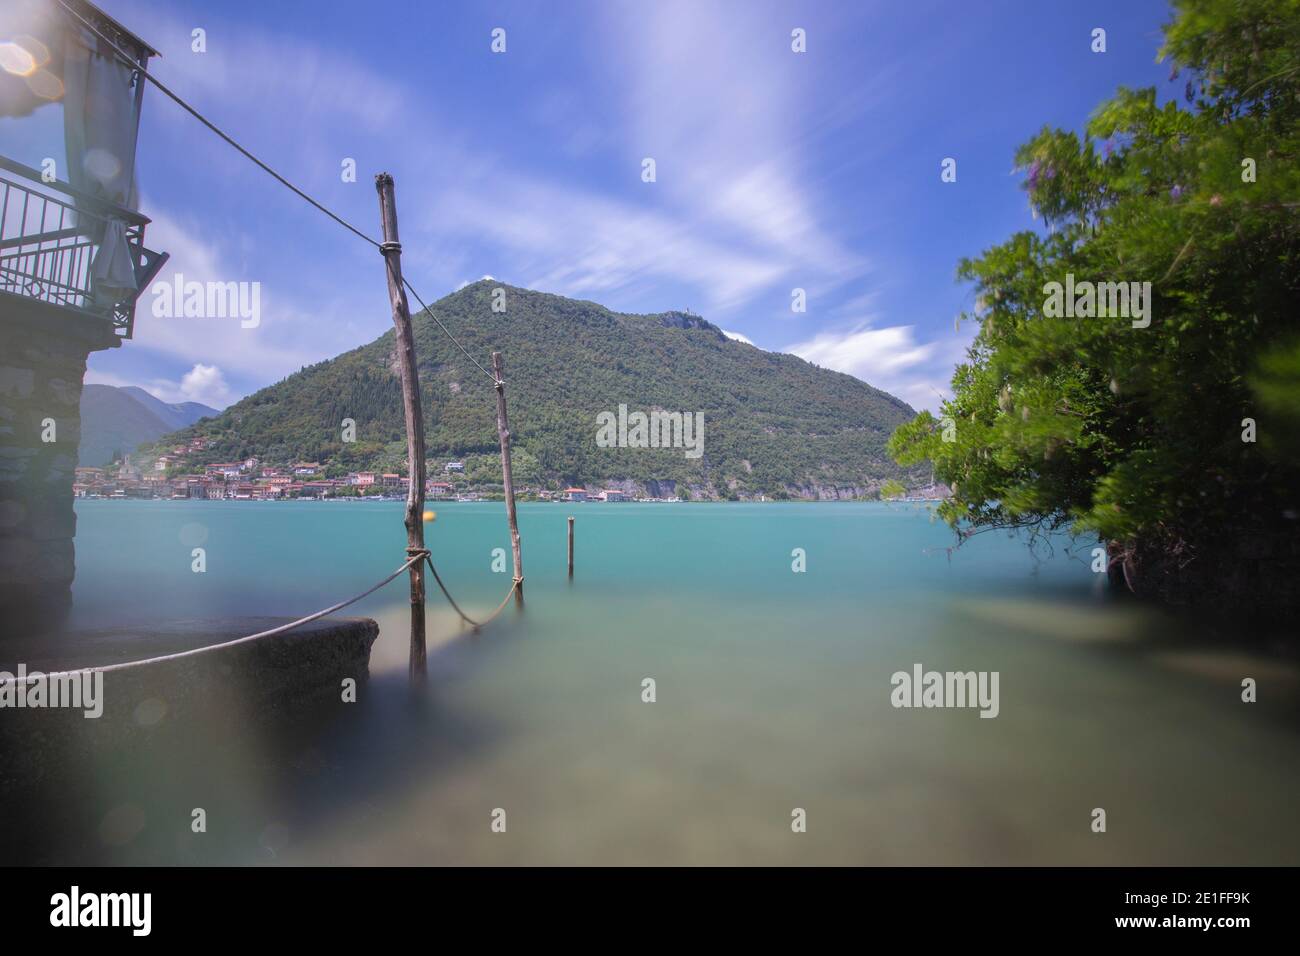 Long exposure of Island Monte Isola in Lago D'Iseo, Italy Stock Photo